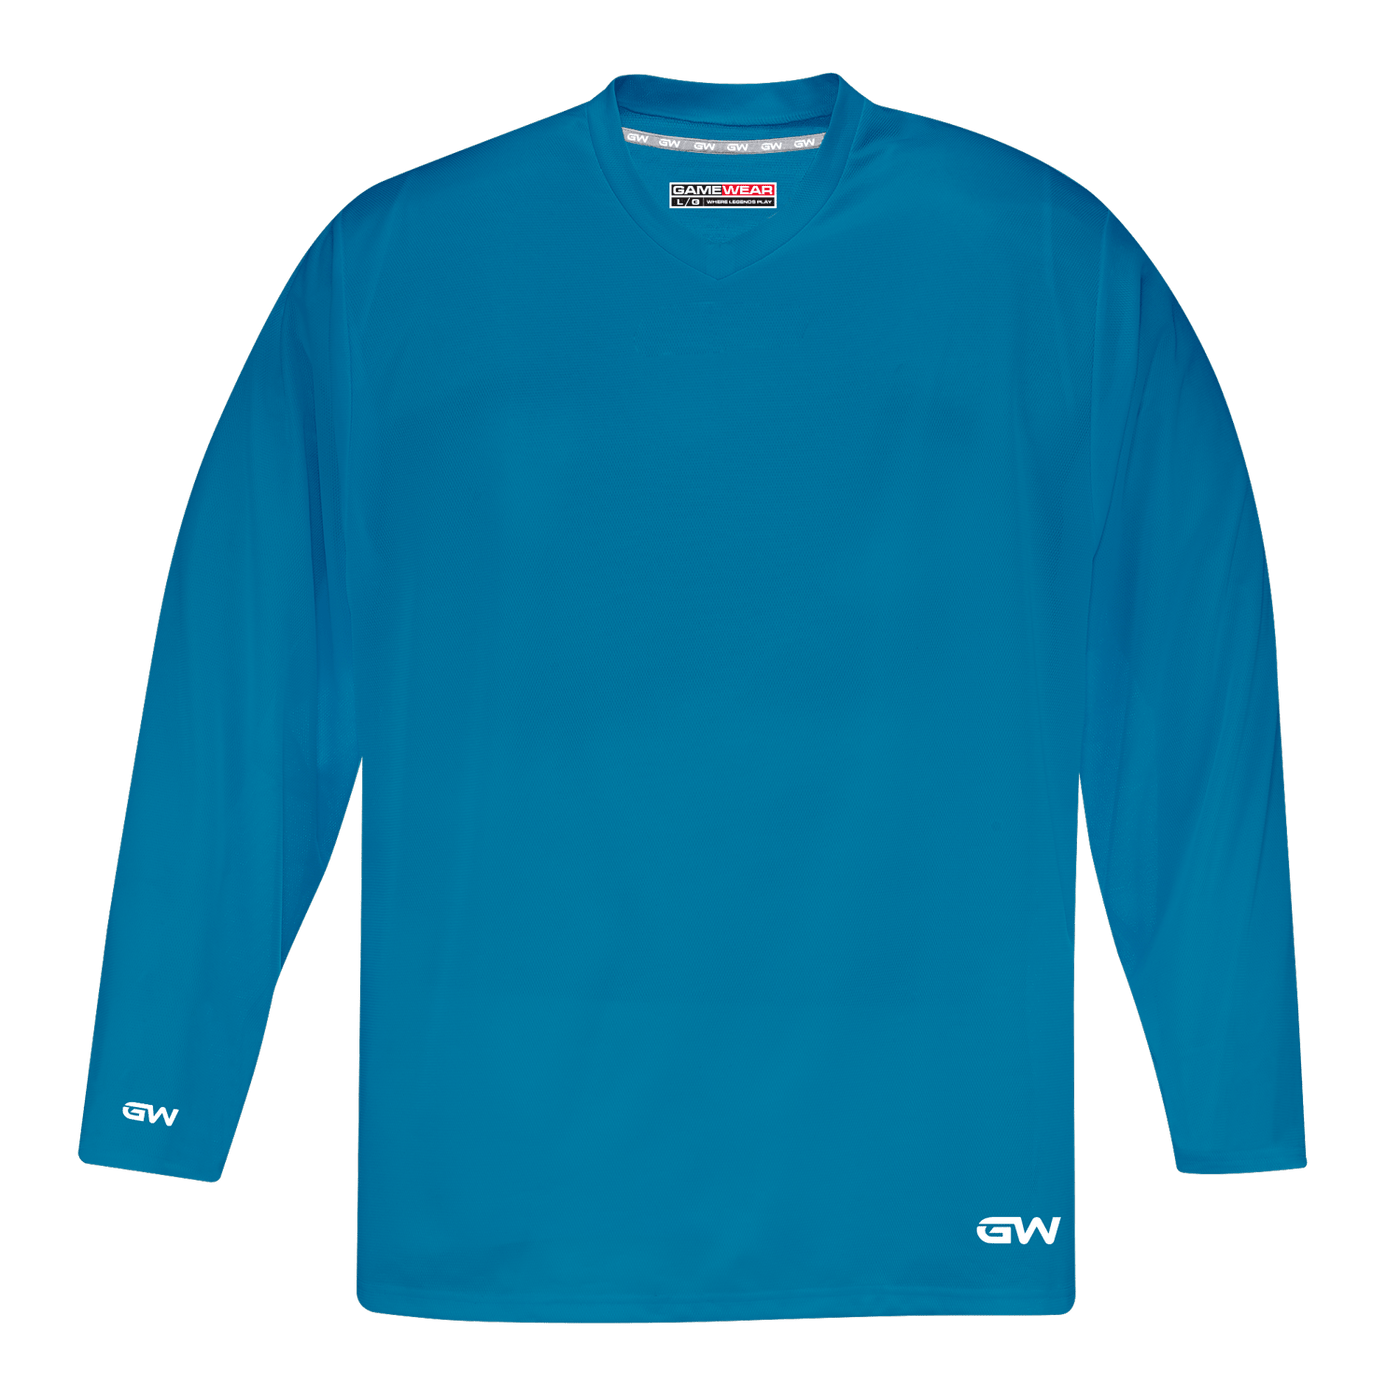 GameWear GW5500 ProLite Series Senior Hockey Practice Jersey - Turquoise - The Hockey Shop Source For Sports